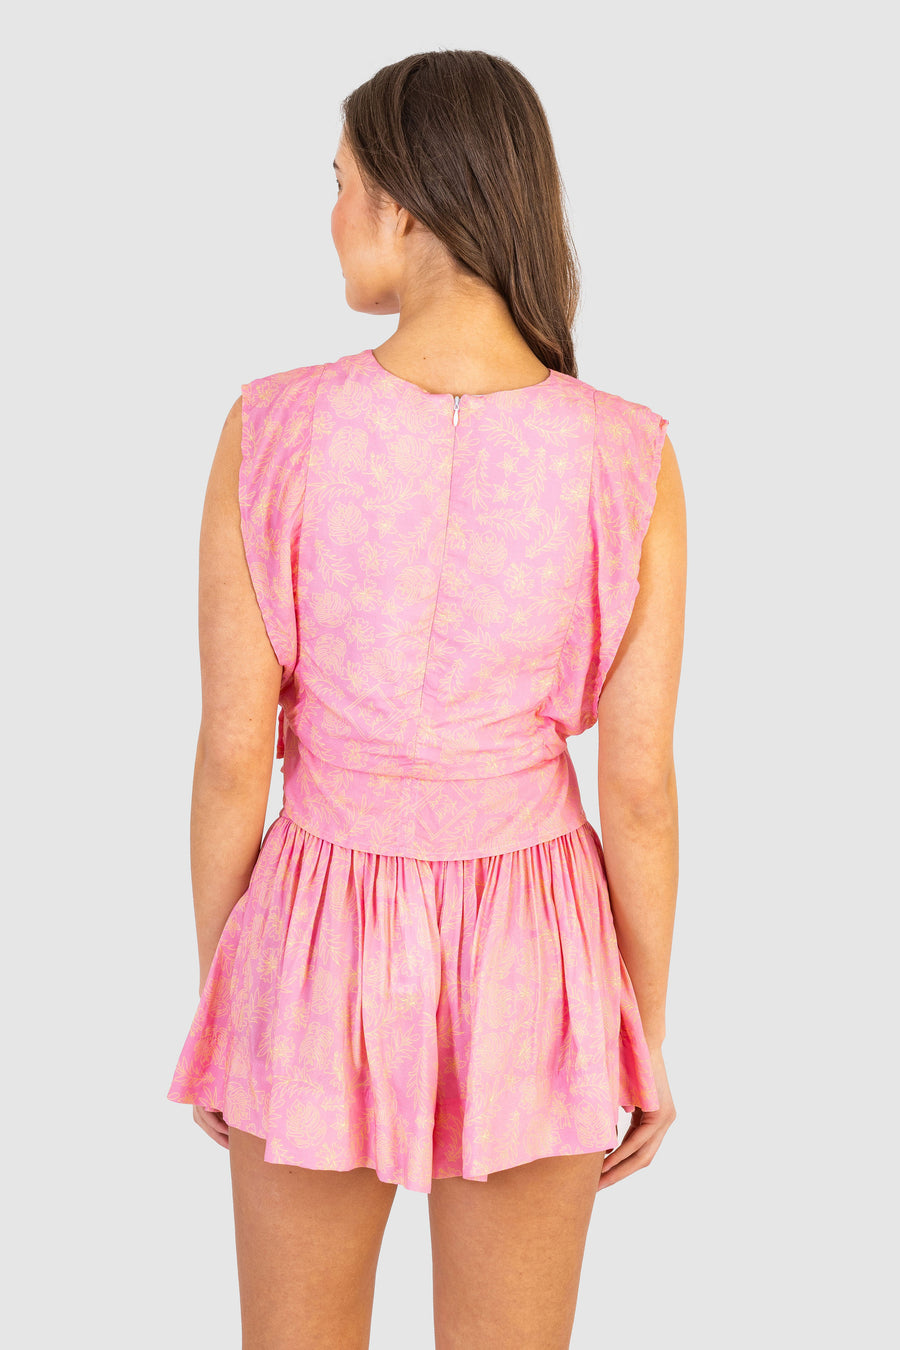 Wren Top Pink Surf Toile *Limited*Edition*